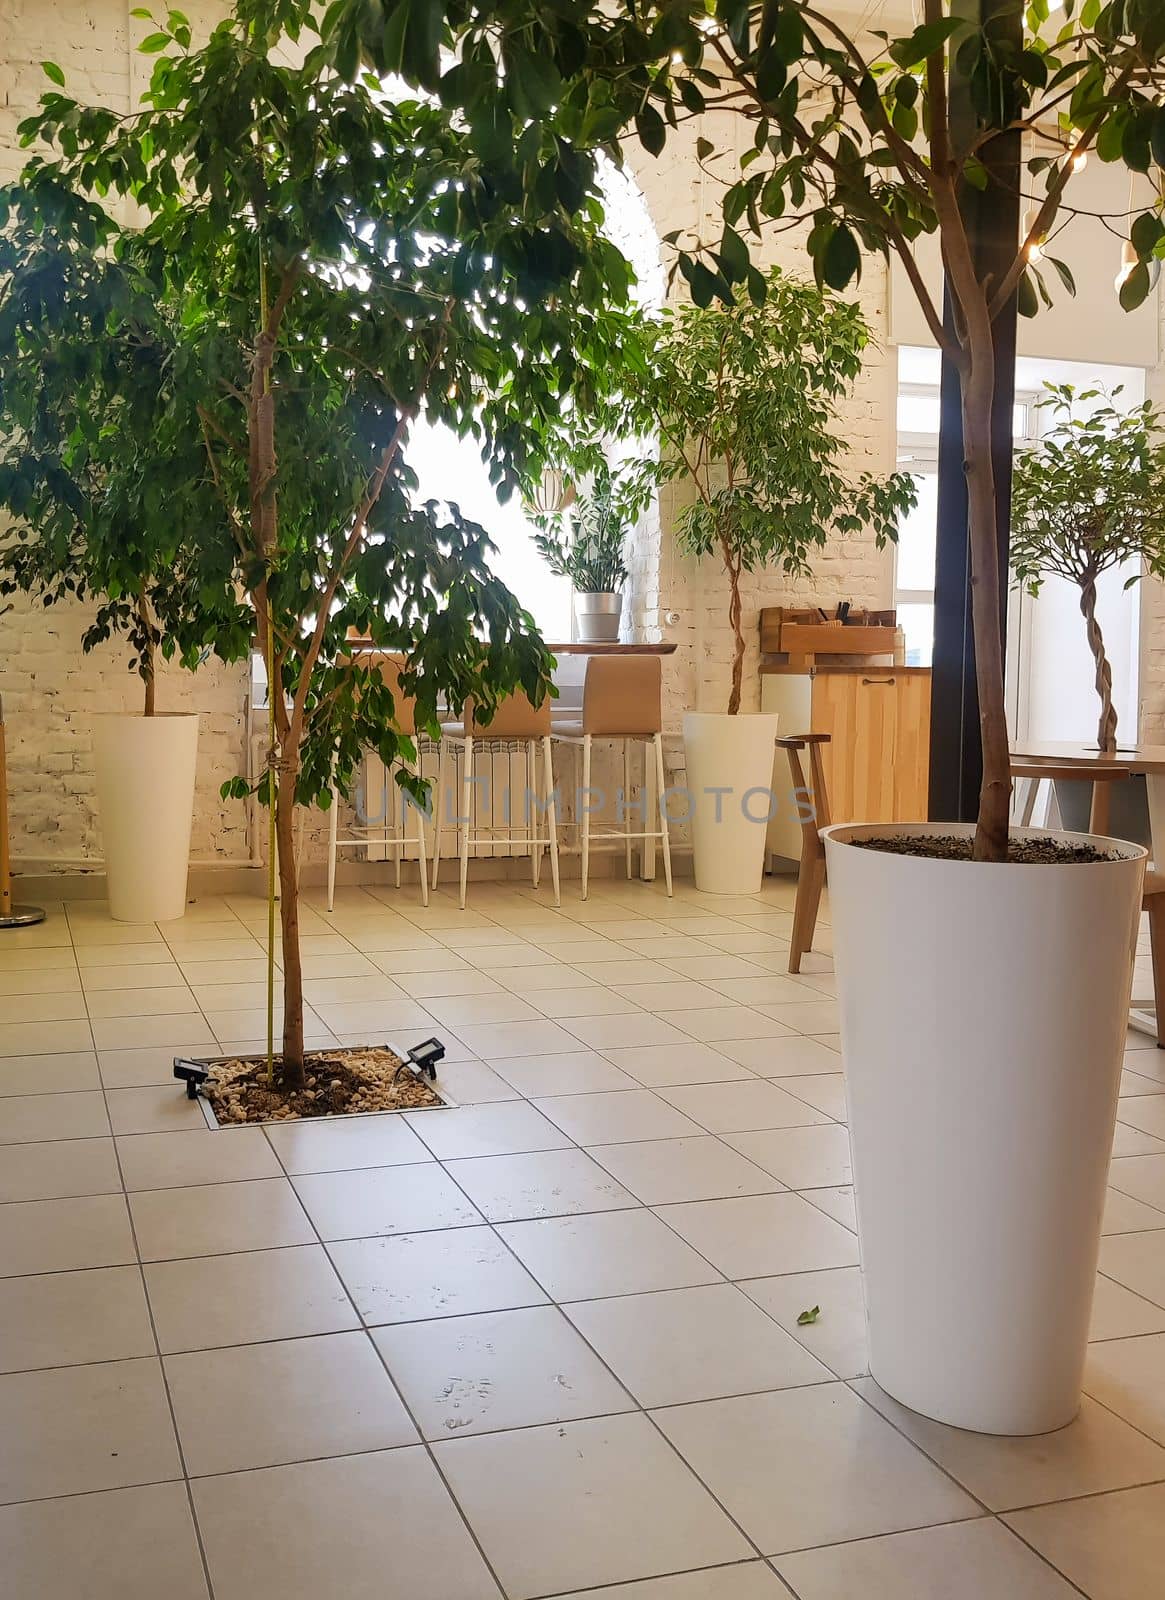 Cozy interior of a modern cafe with plants, chairs. A large pot with plants in the foreground of the vertical photo.